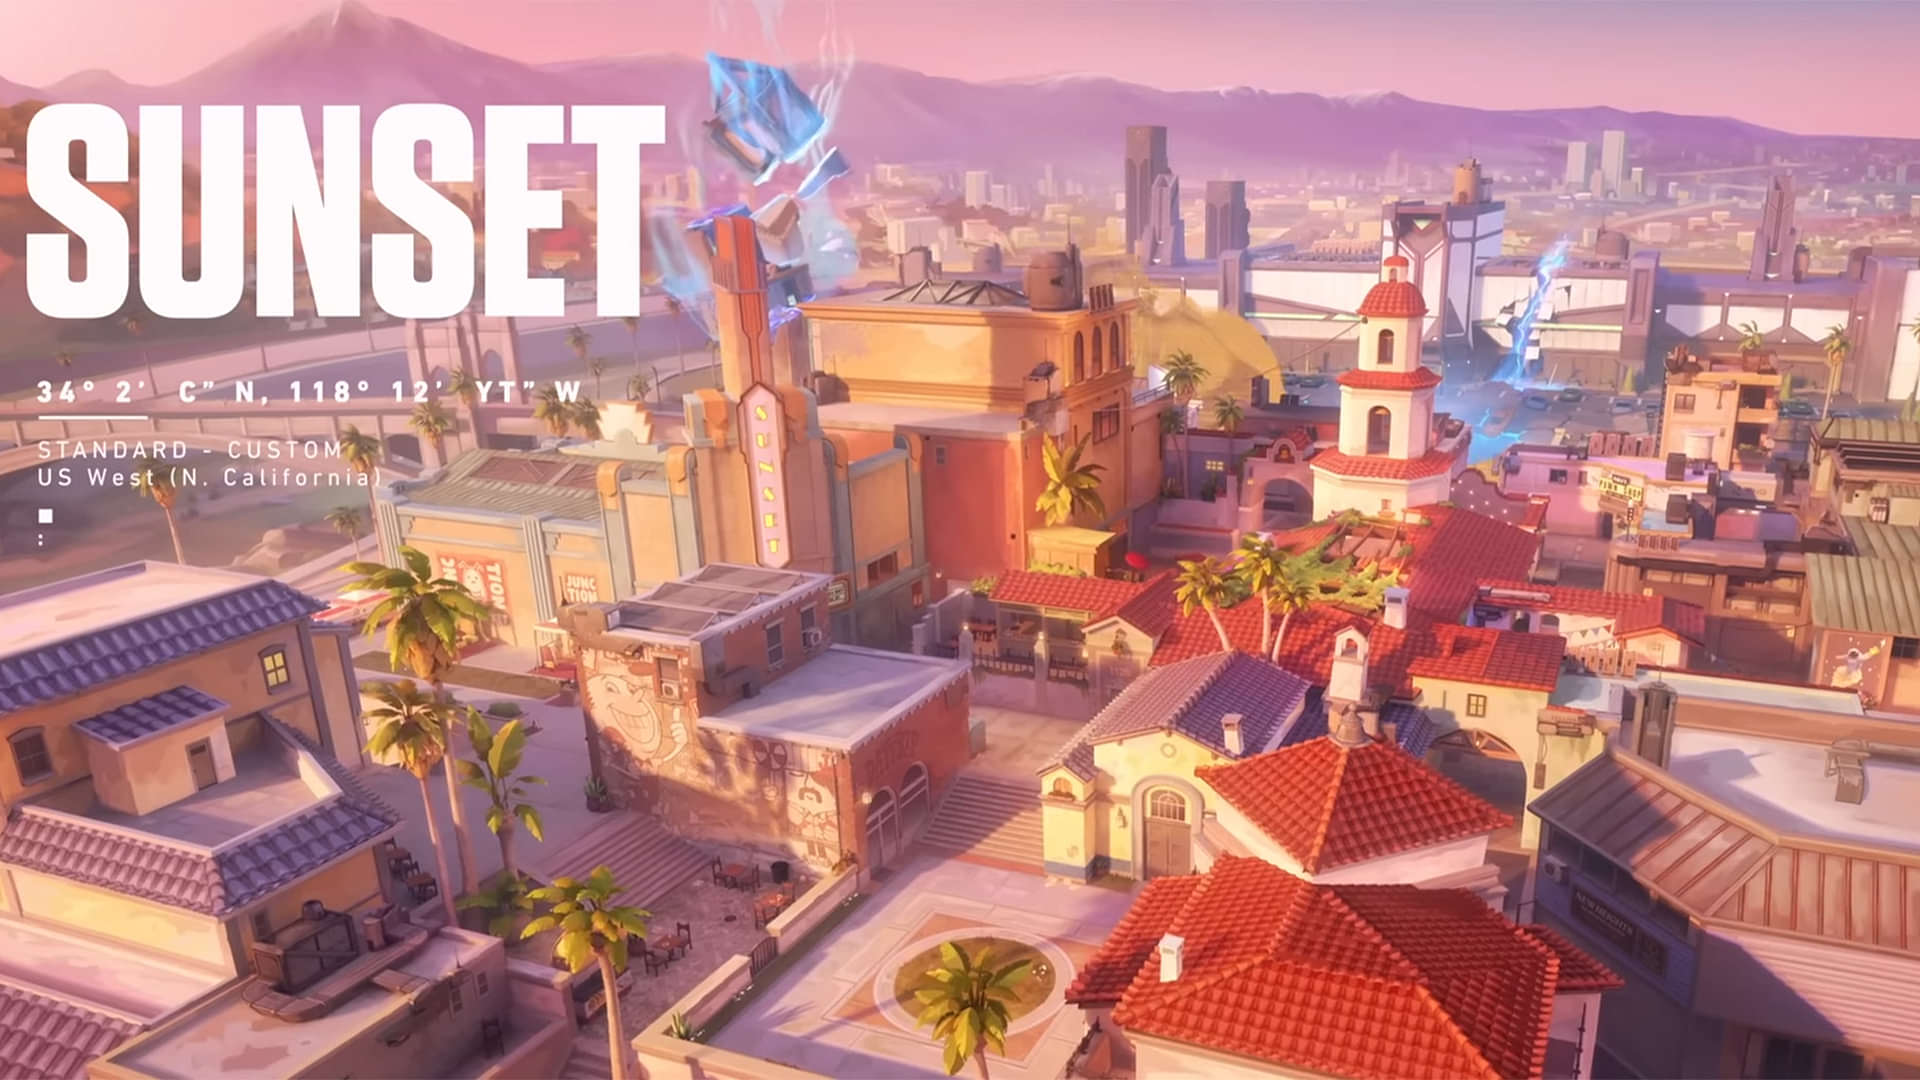 Sunset will be the next Valorant Map. There should be teasers this wee